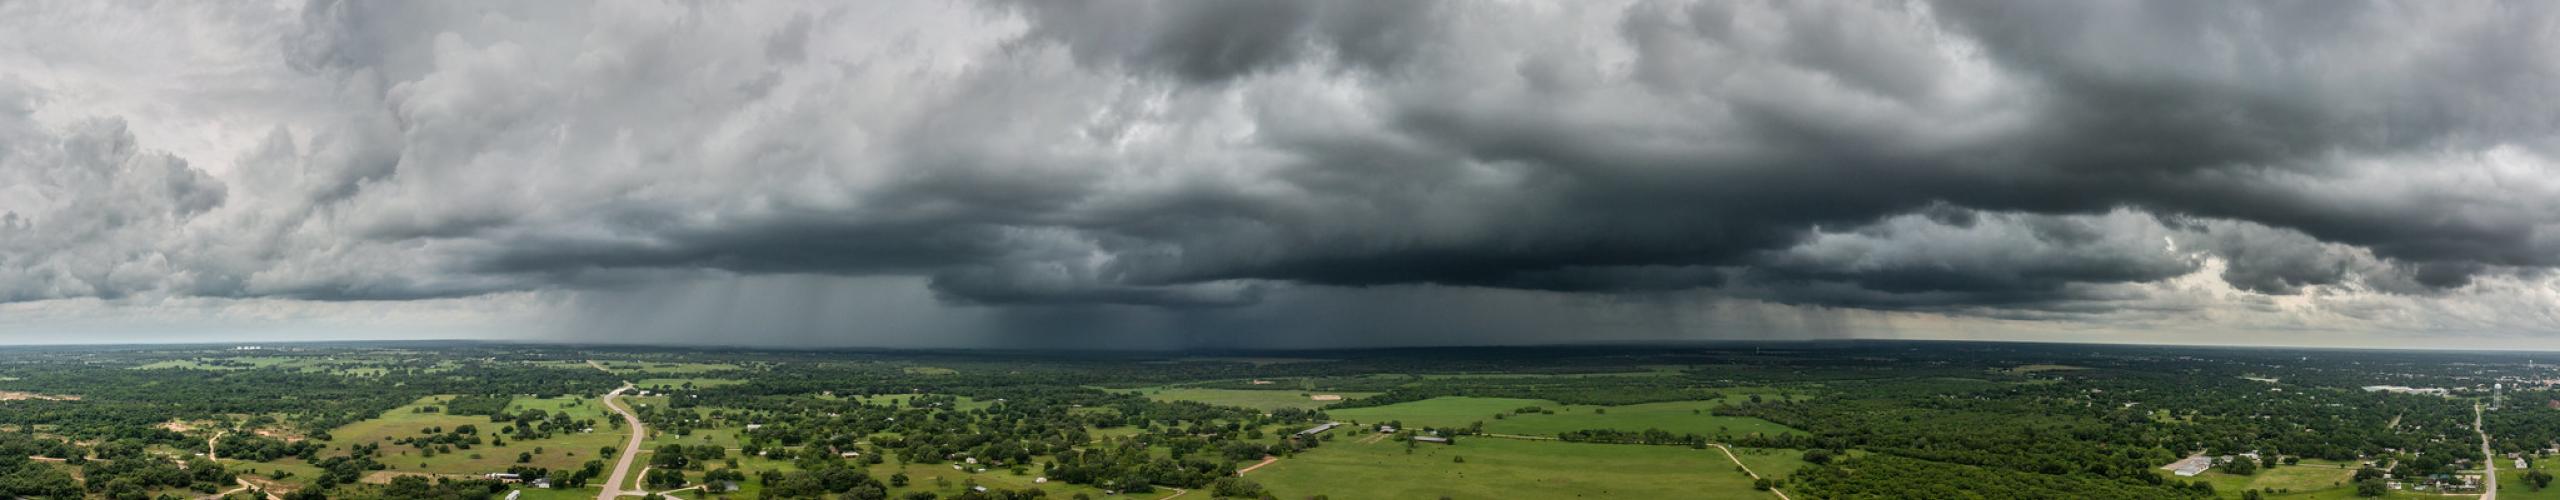 Aerial shot of land with storm clouds above